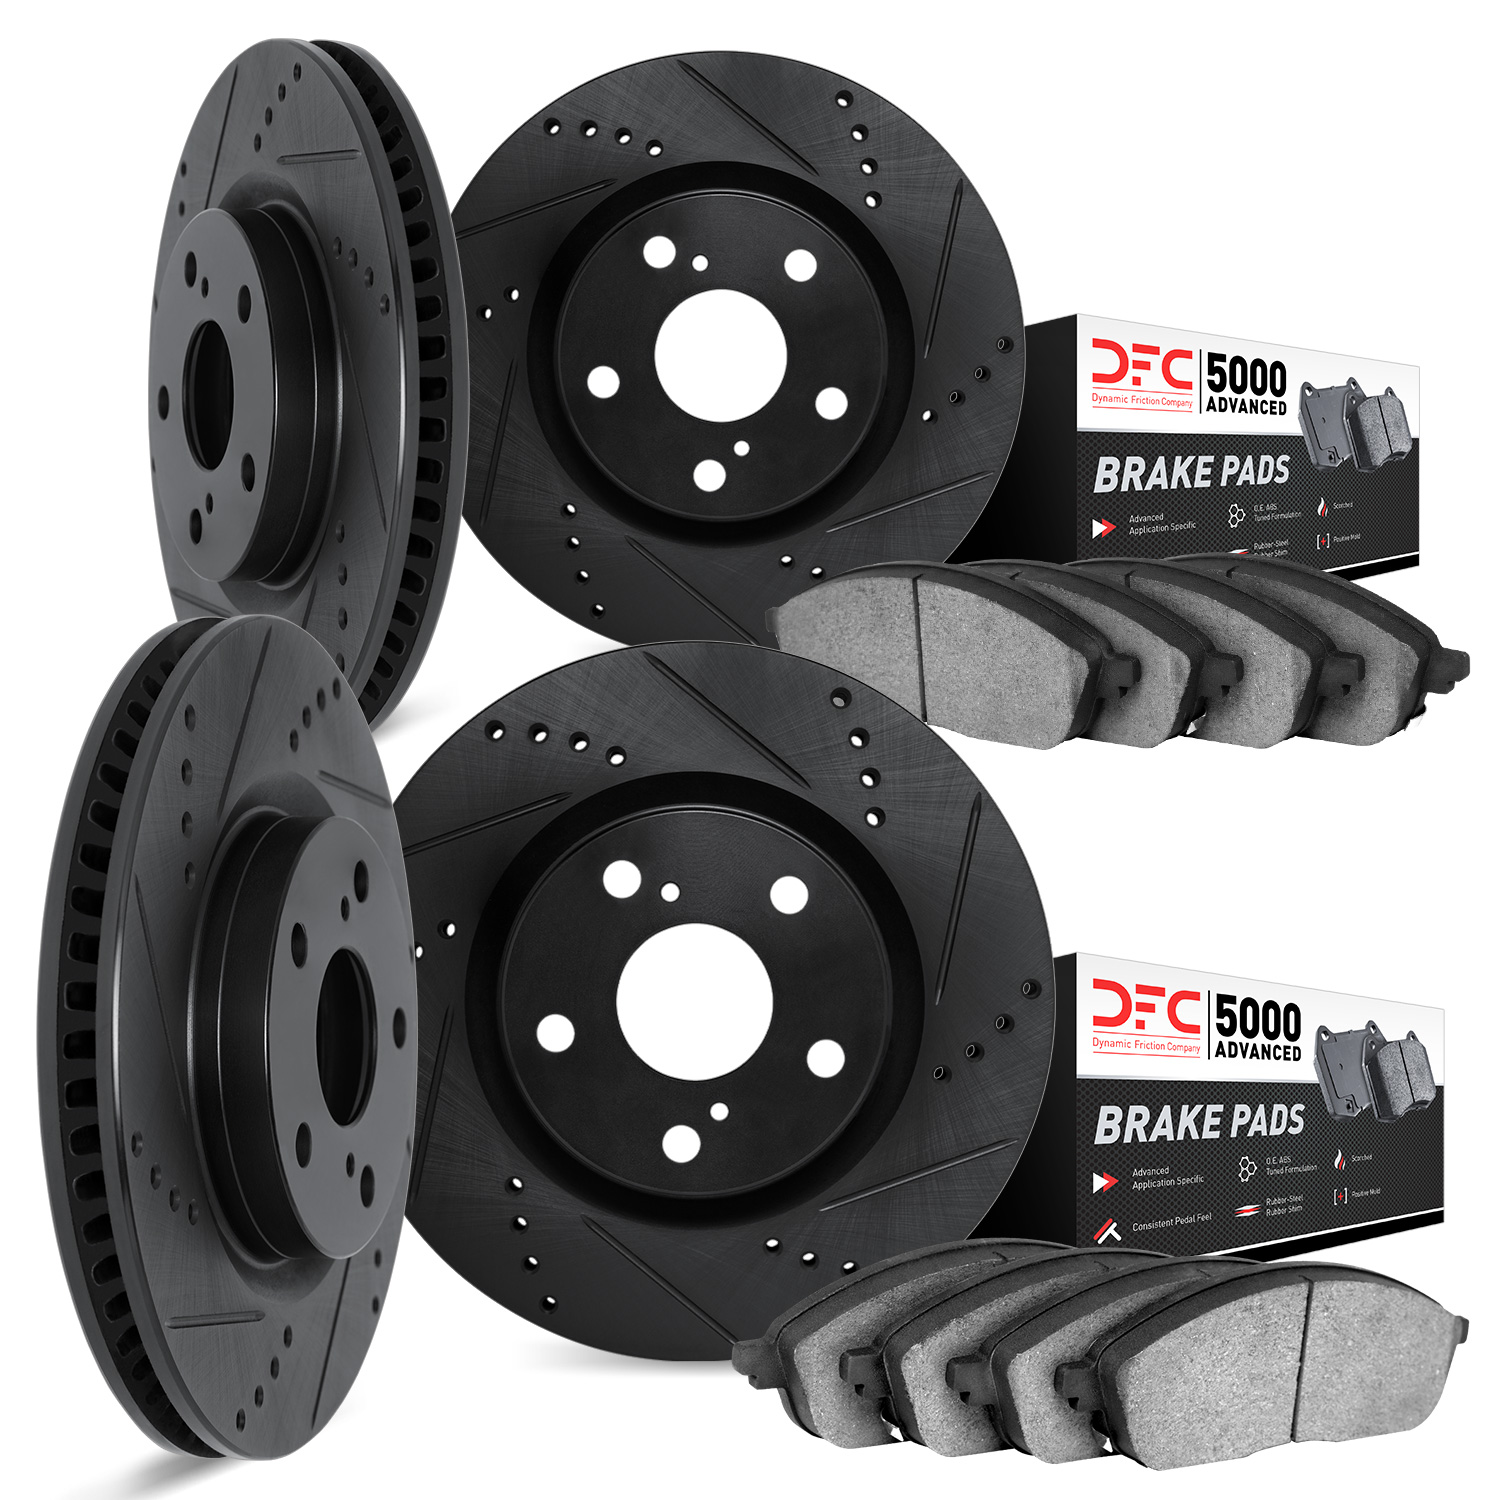 8504-75023 Drilled/Slotted Brake Rotors w/5000 Advanced Brake Pads Kit [Black], 2010-2017 Lexus/Toyota/Scion, Position: Front an